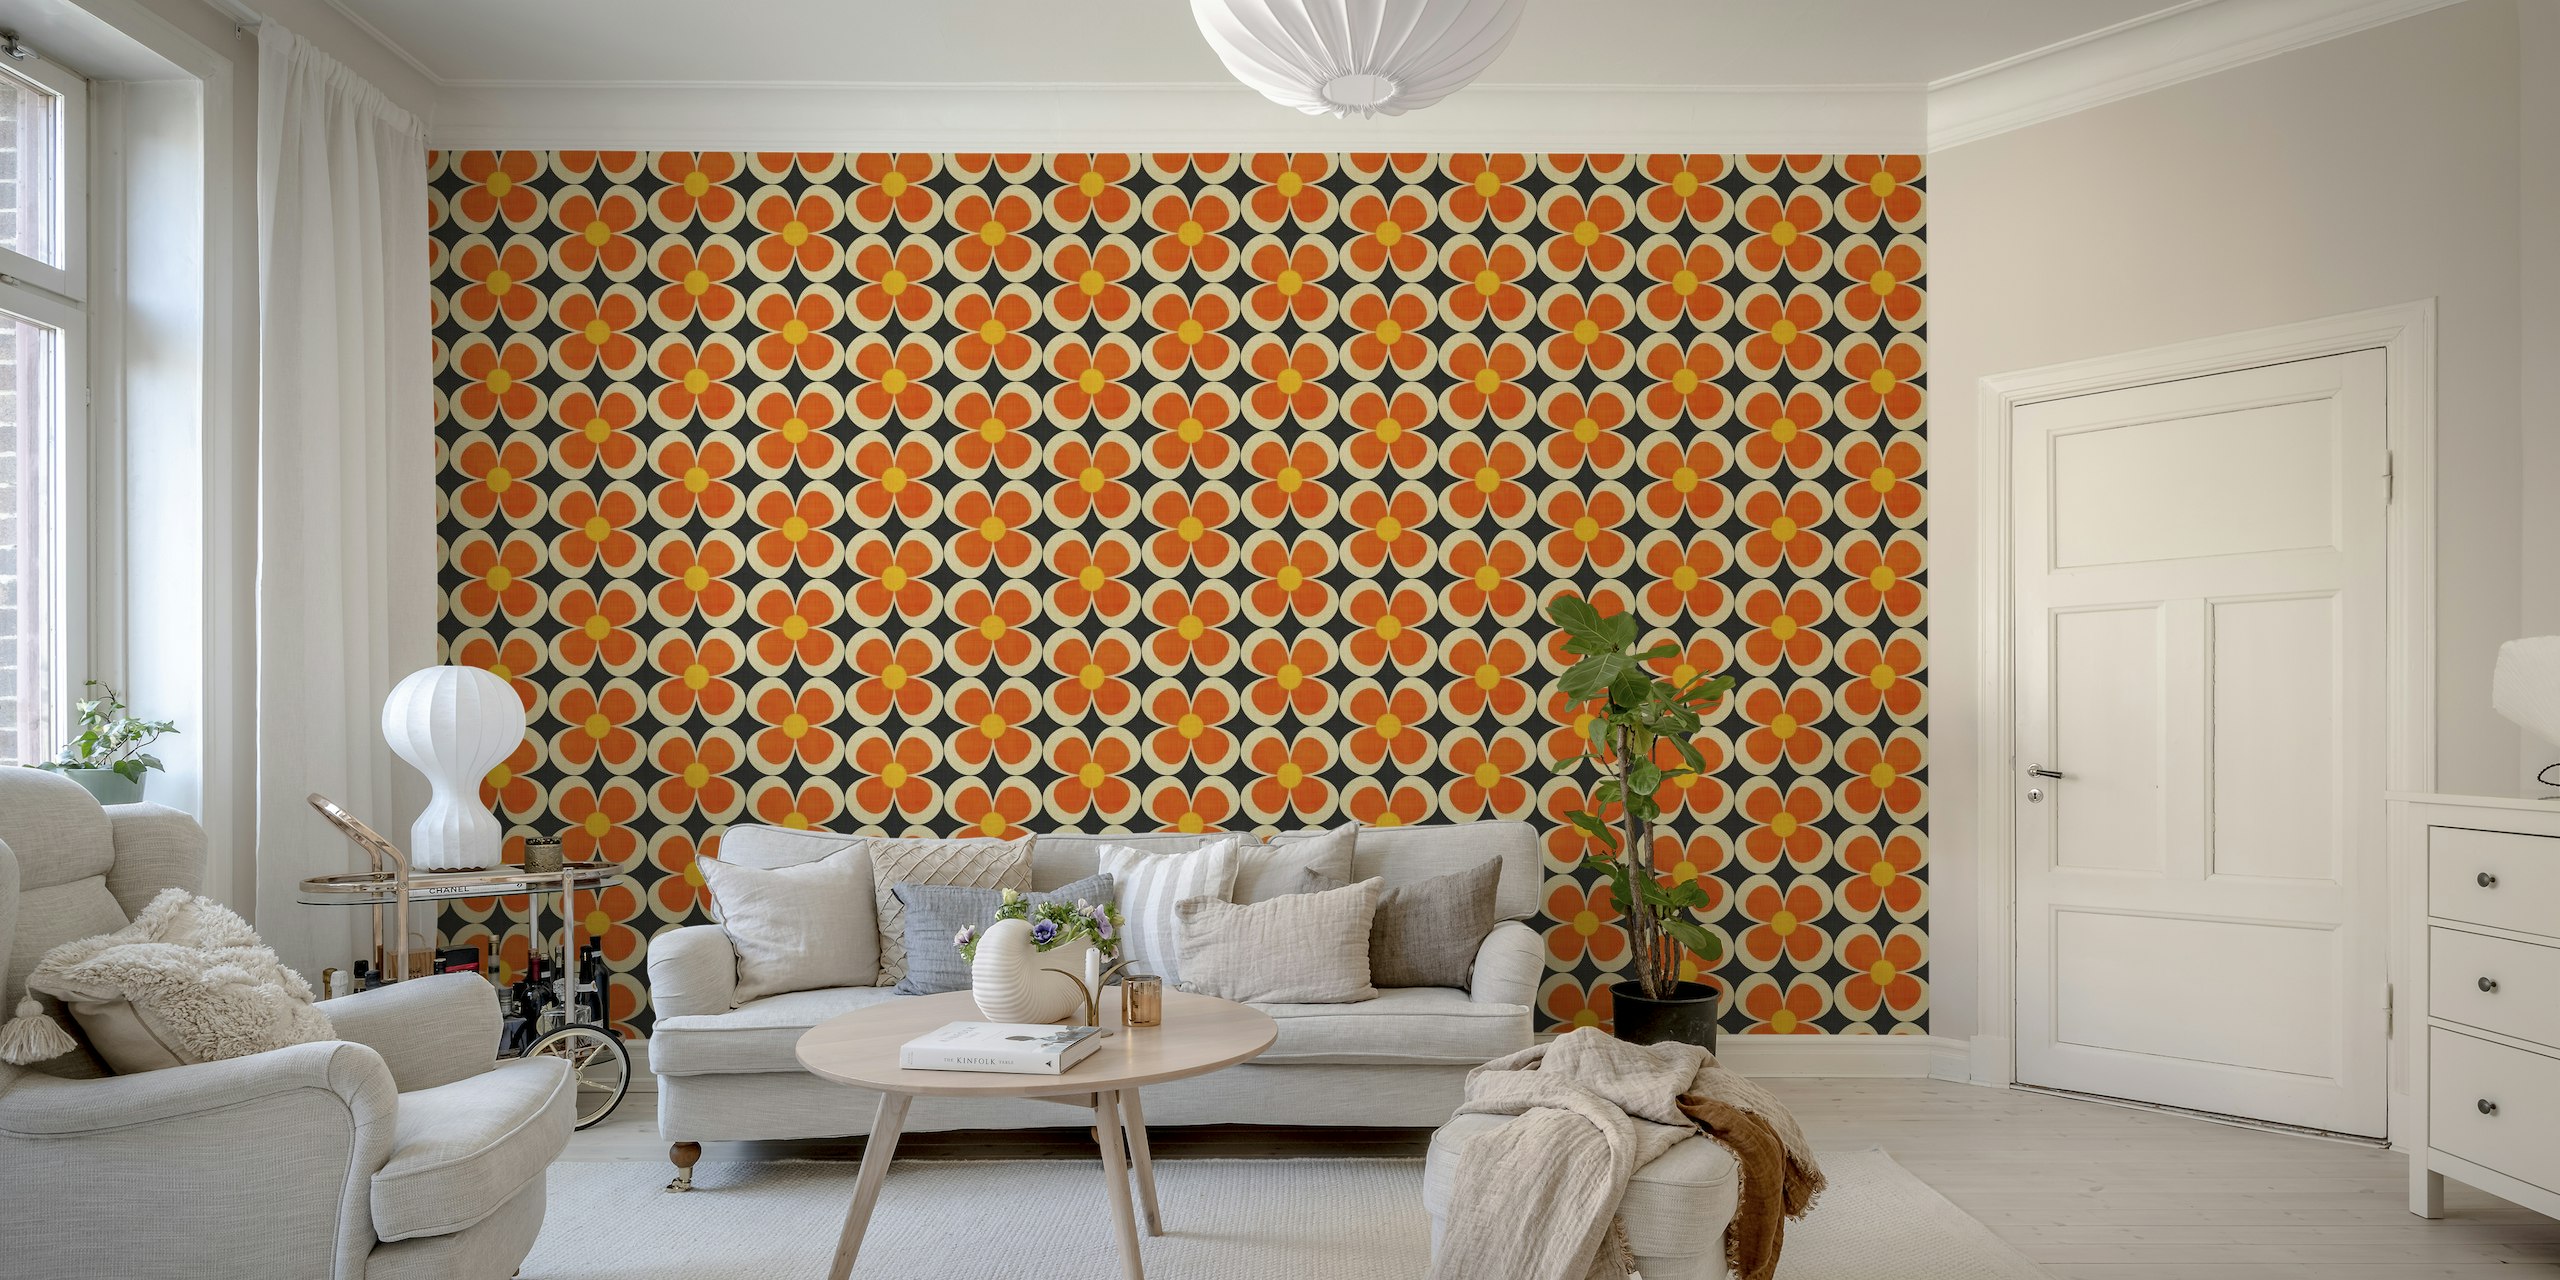 Retro-inspired groovy geometric floral wall mural in orange and brown tones